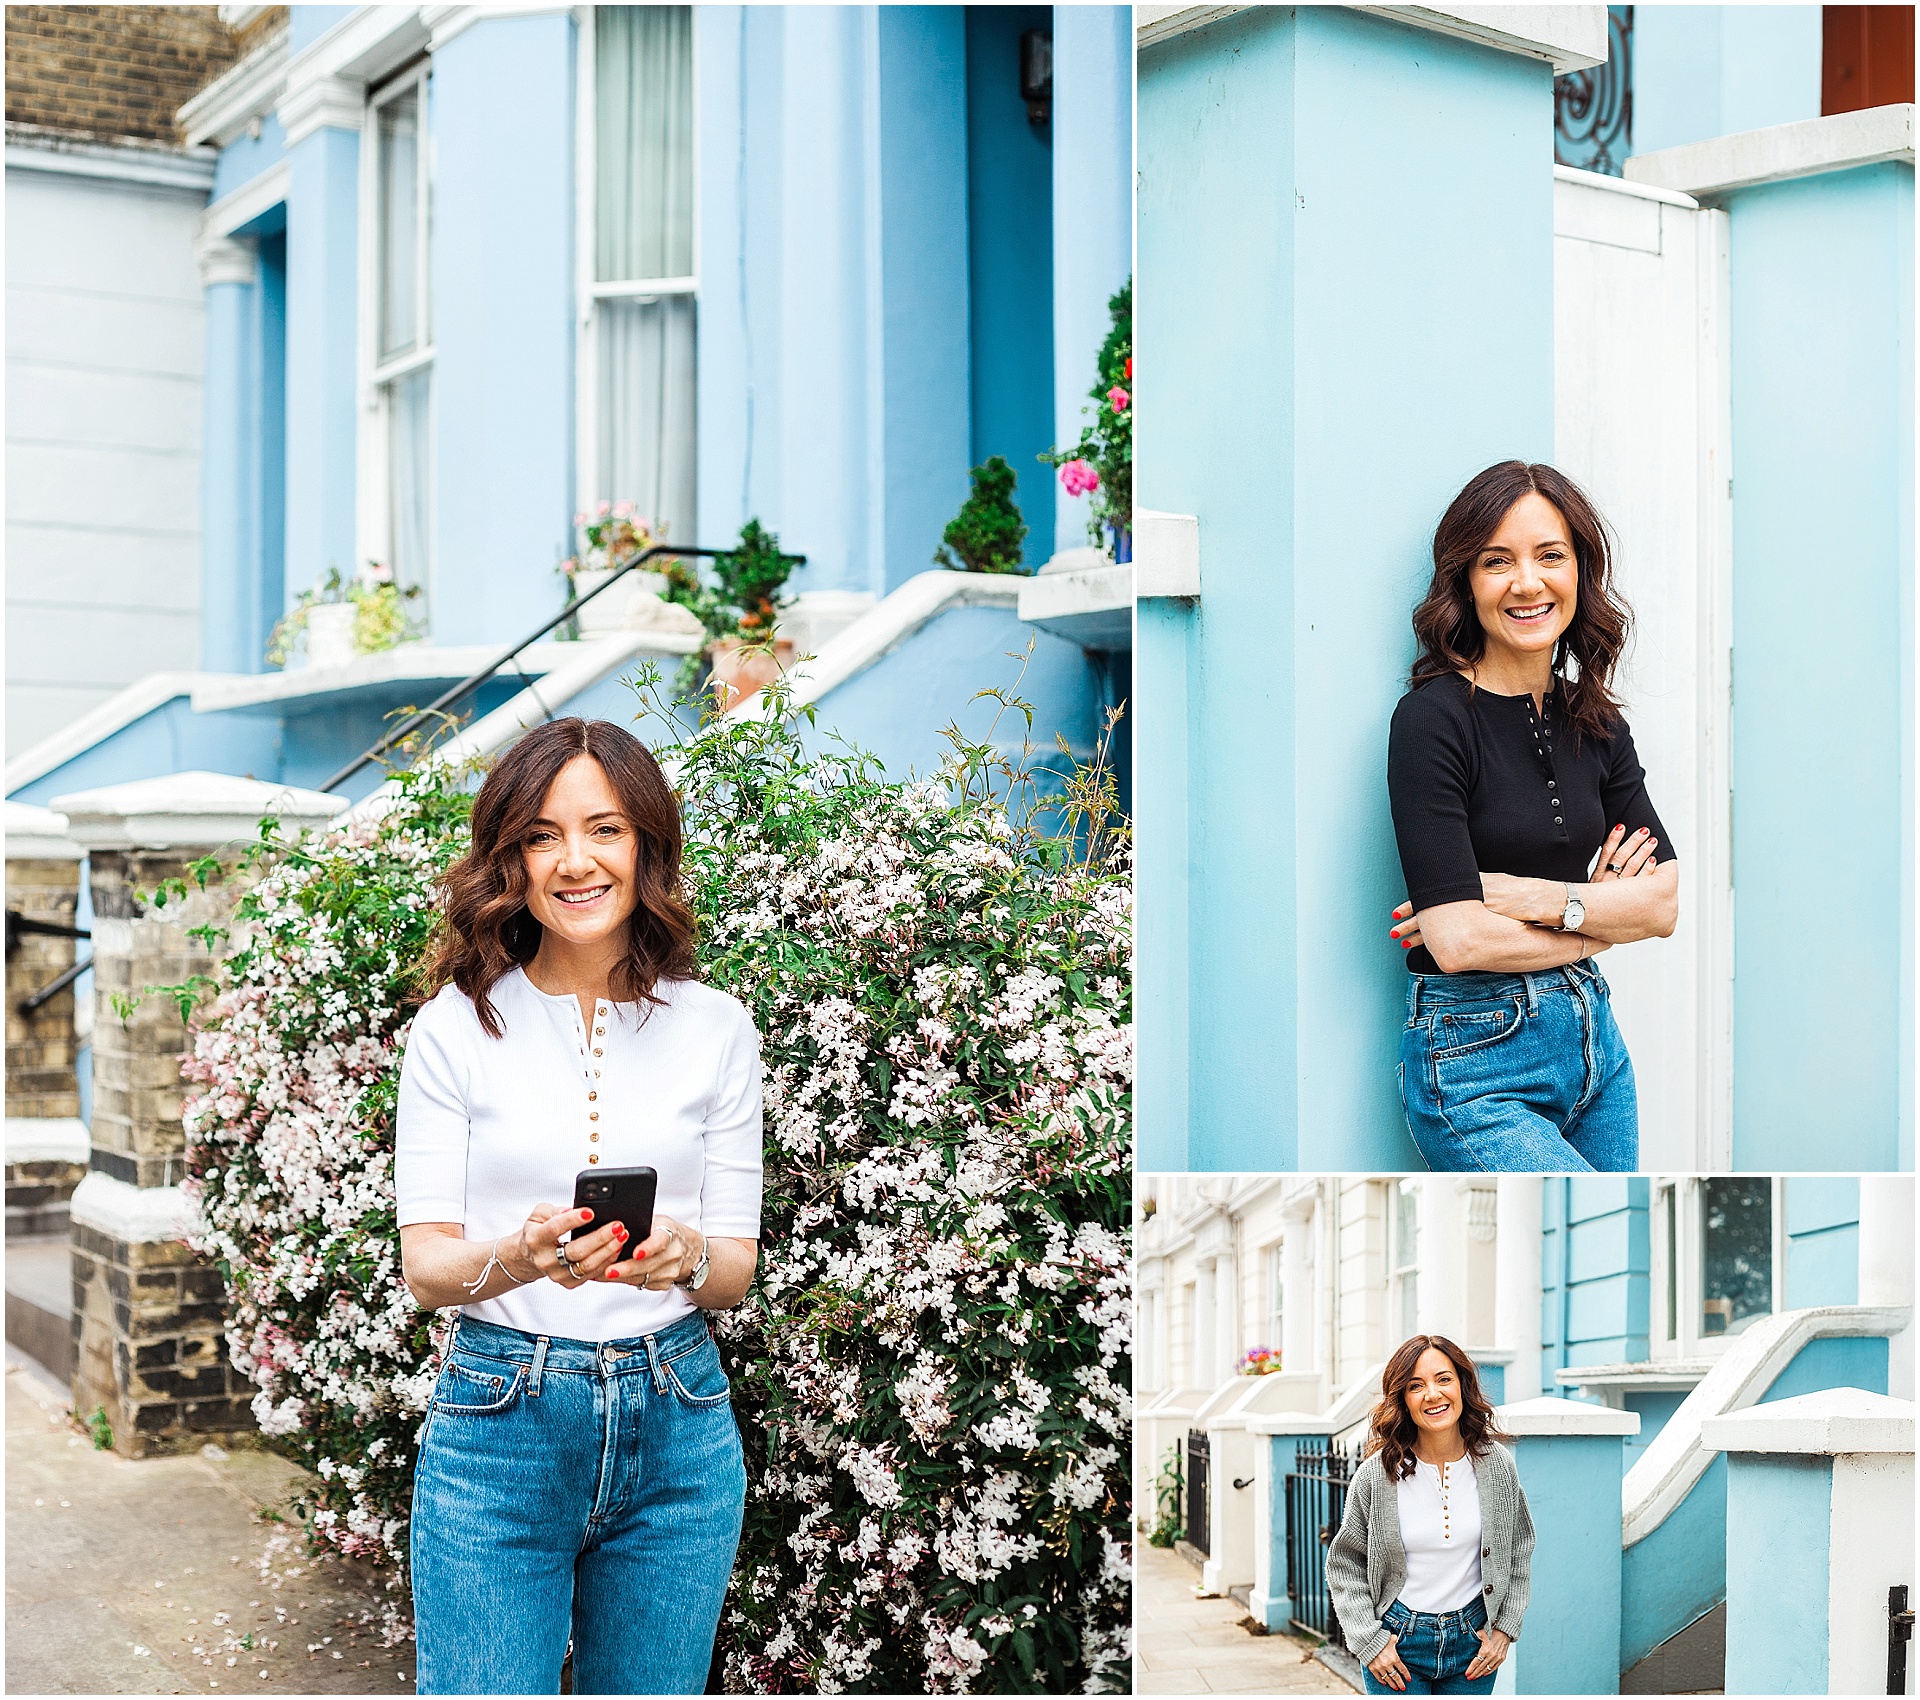 summer brand shoot images by London brand photographer AKP Branding Stories